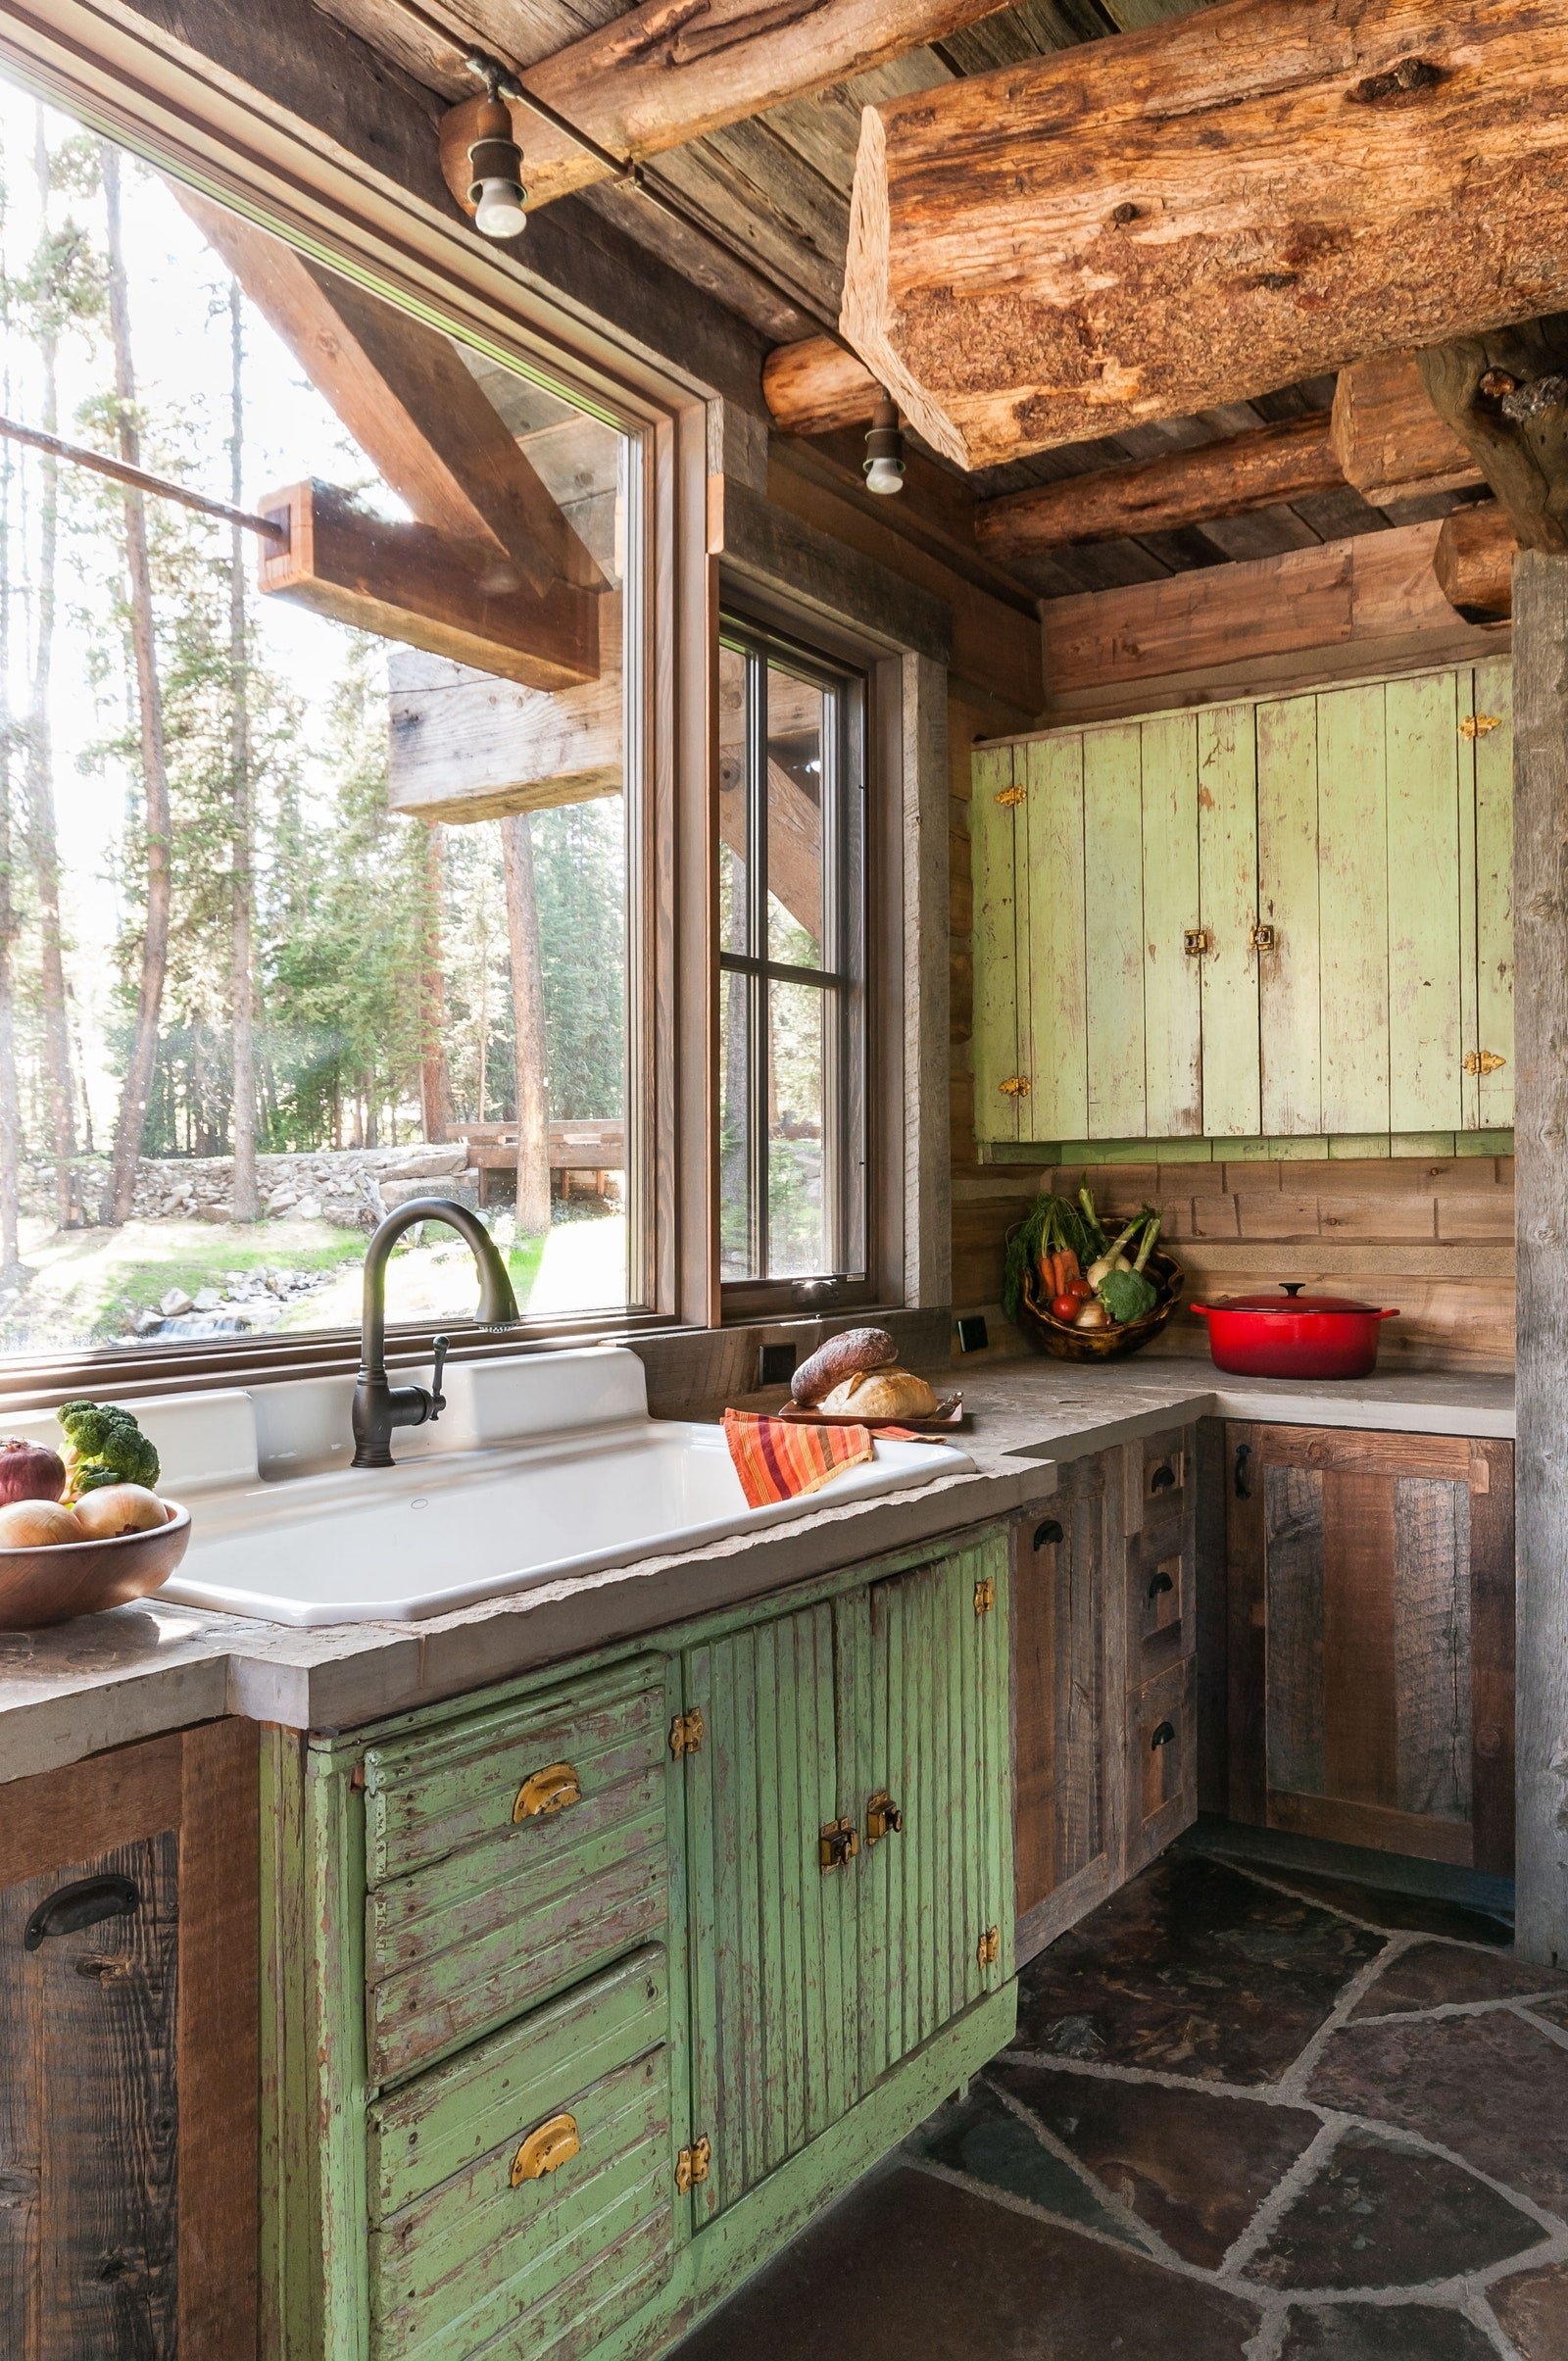 https://foter.com/photos/420/aged-looking-cabinets-in-rustic-kitchen.jpg